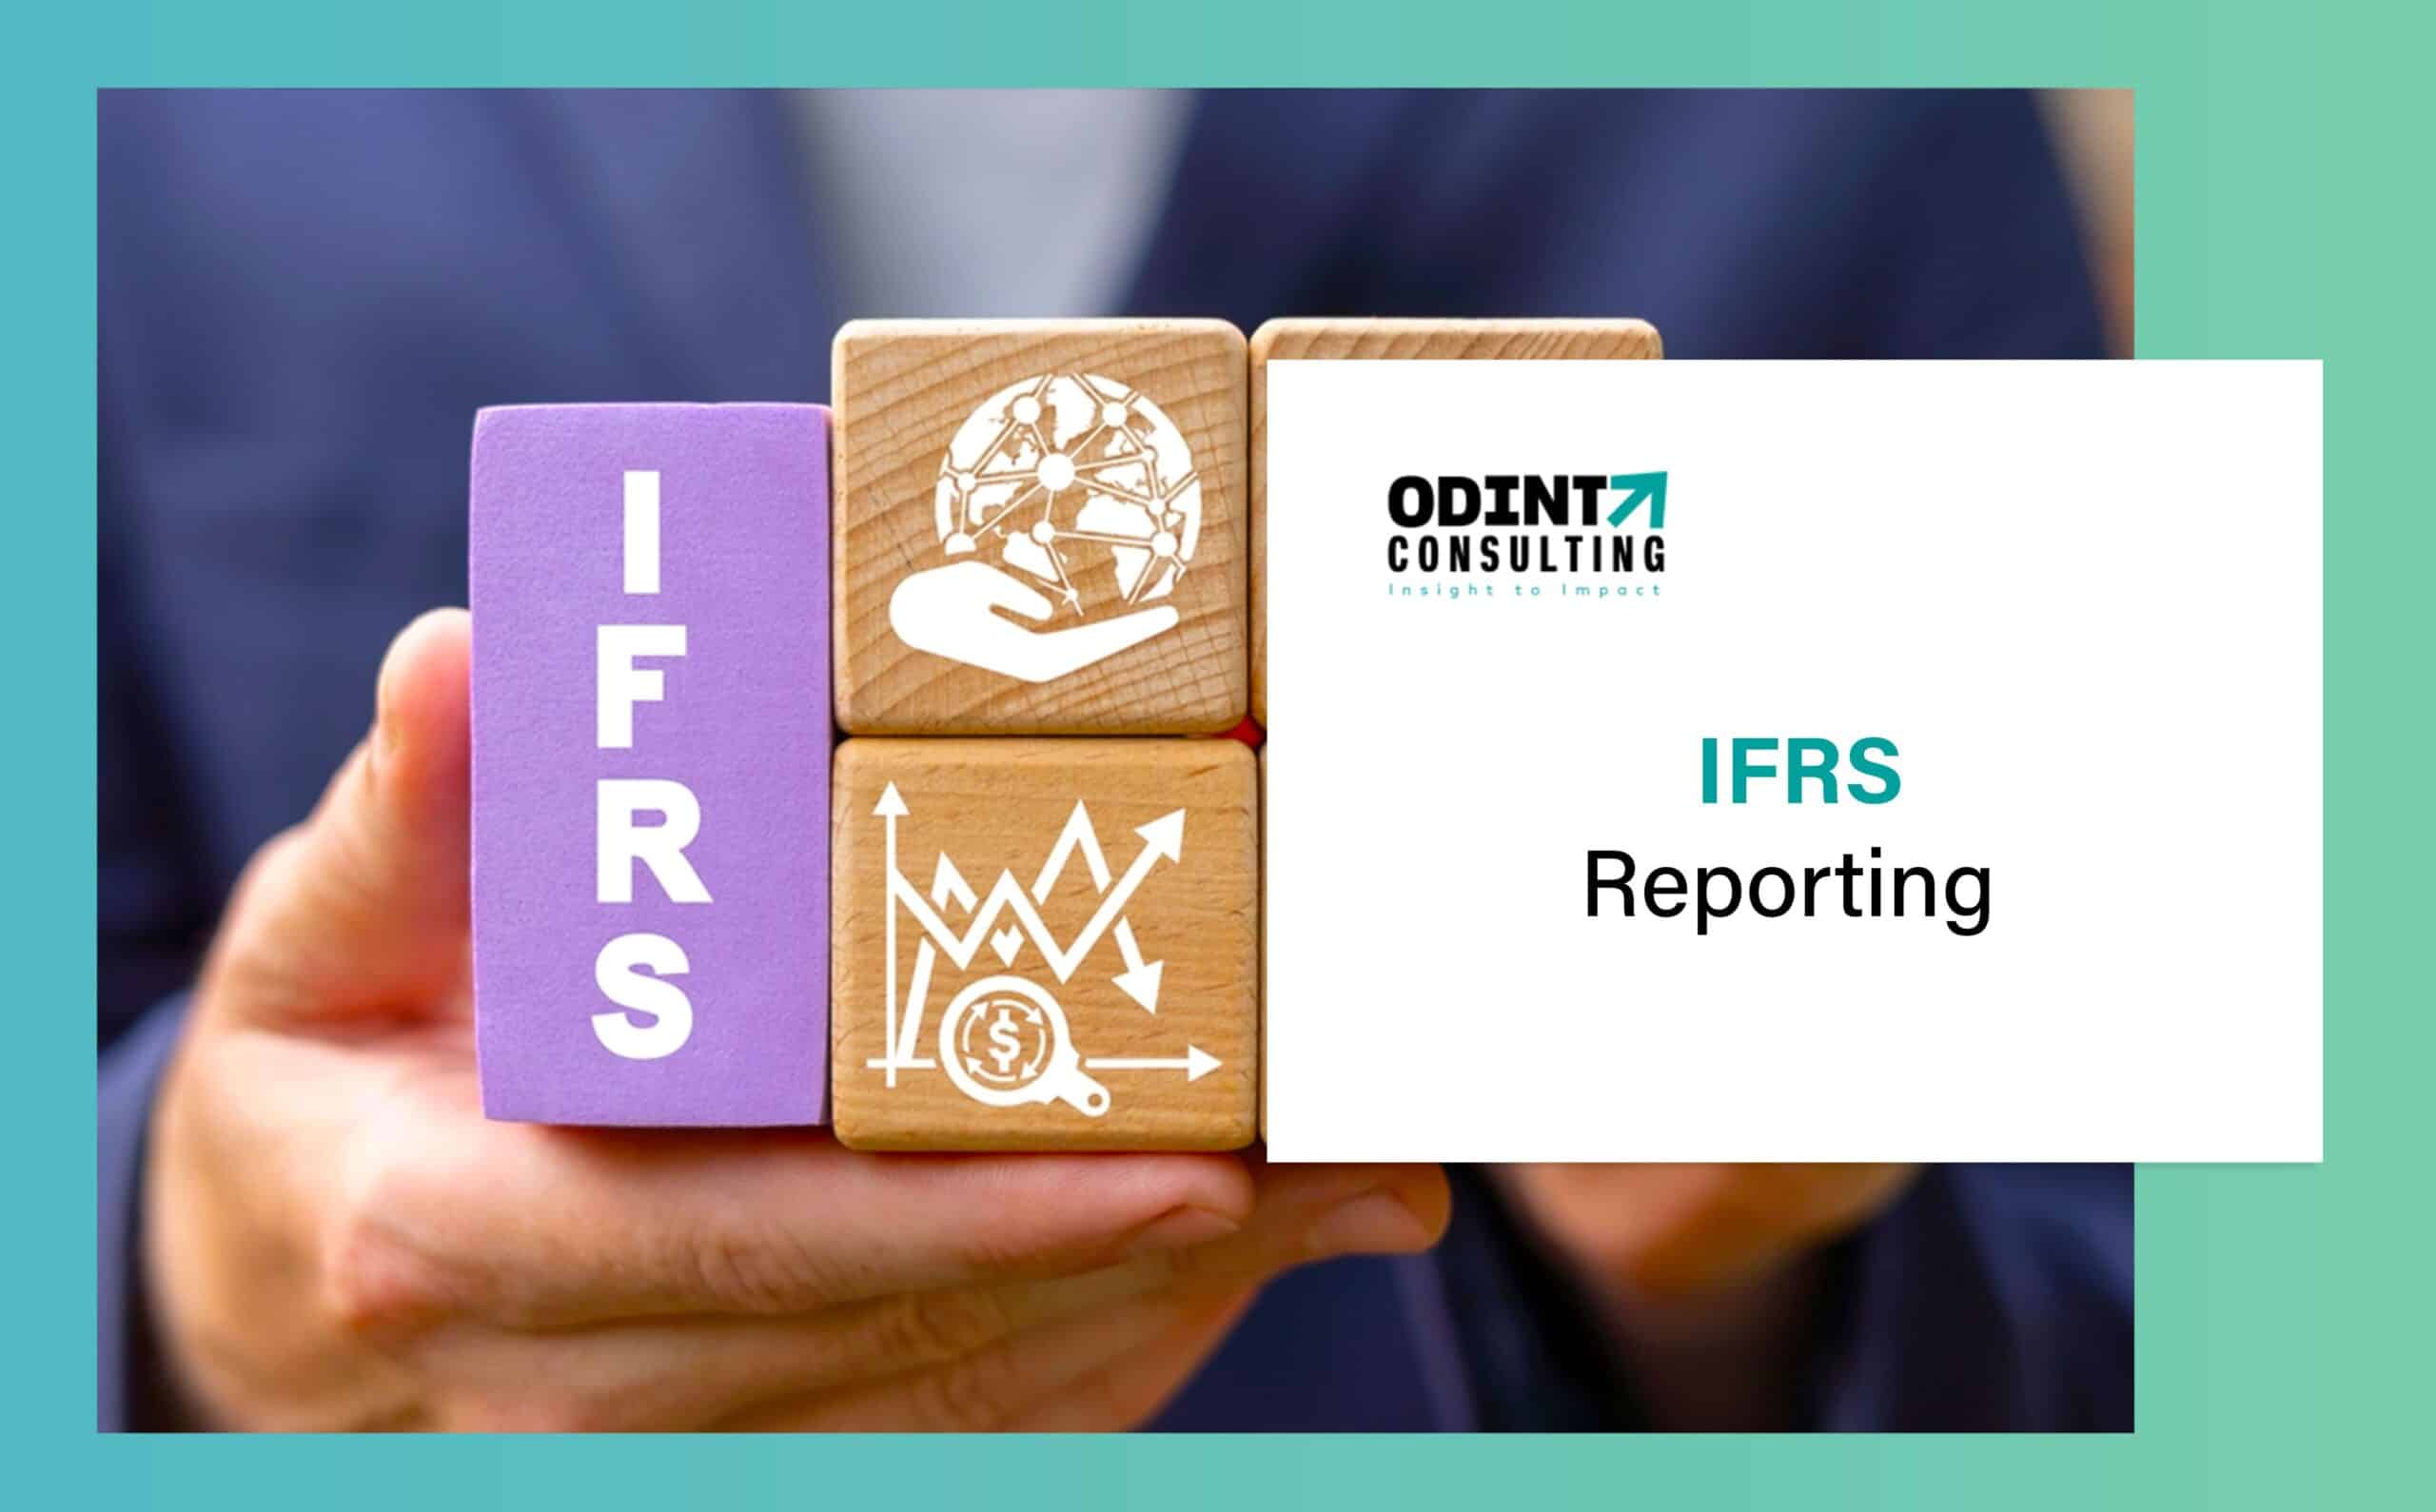 IFRS Reporting Services: Applications & Advantages Discussed